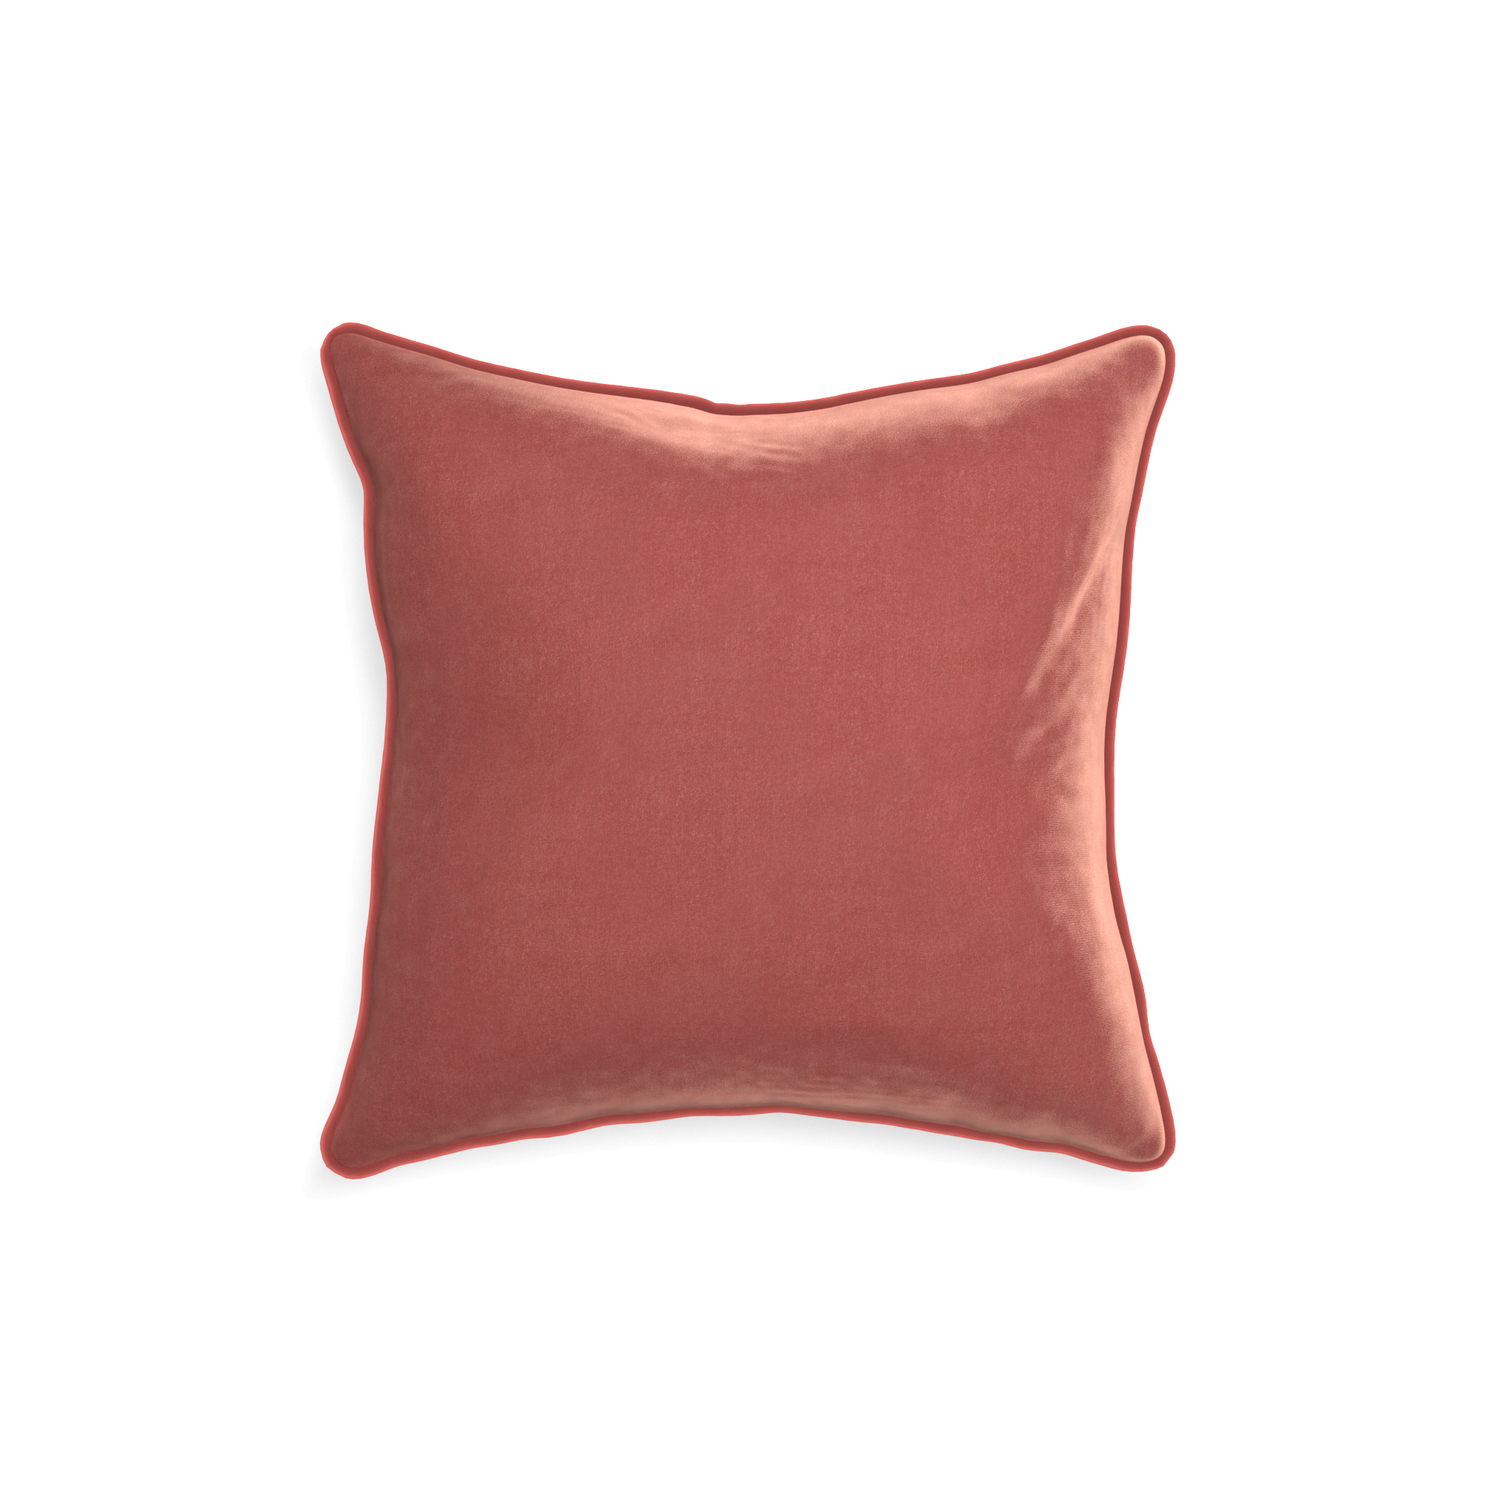 18-square cosmo velvet custom pillow with c piping on white background